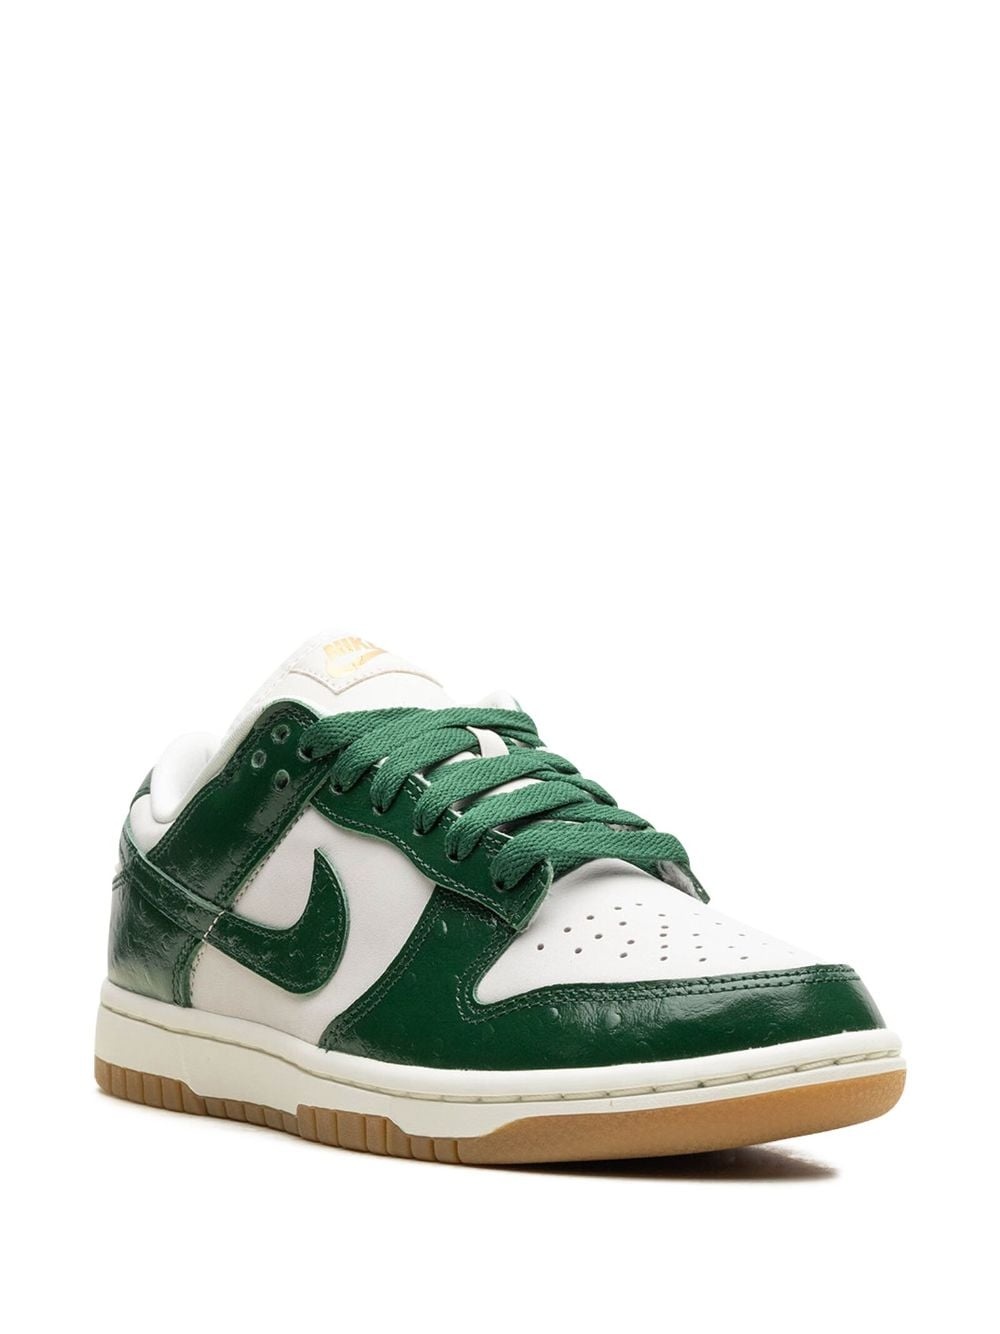 Dunk Low LX "Gorge Green Ostrich" sneakers - 2